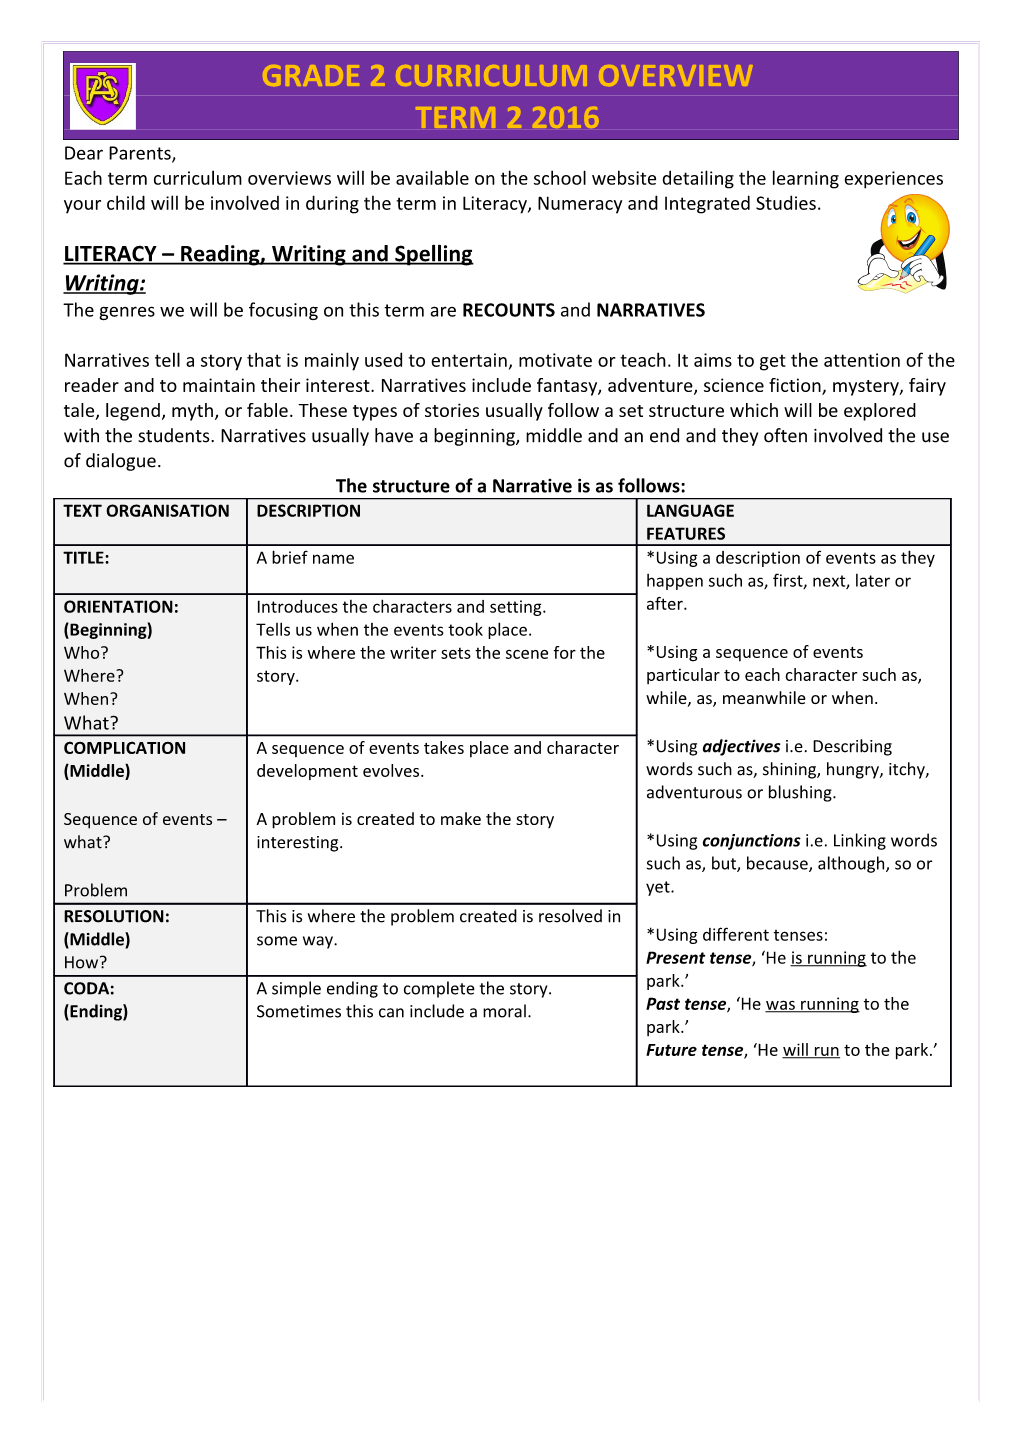 LITERACY Reading, Writing and Spelling